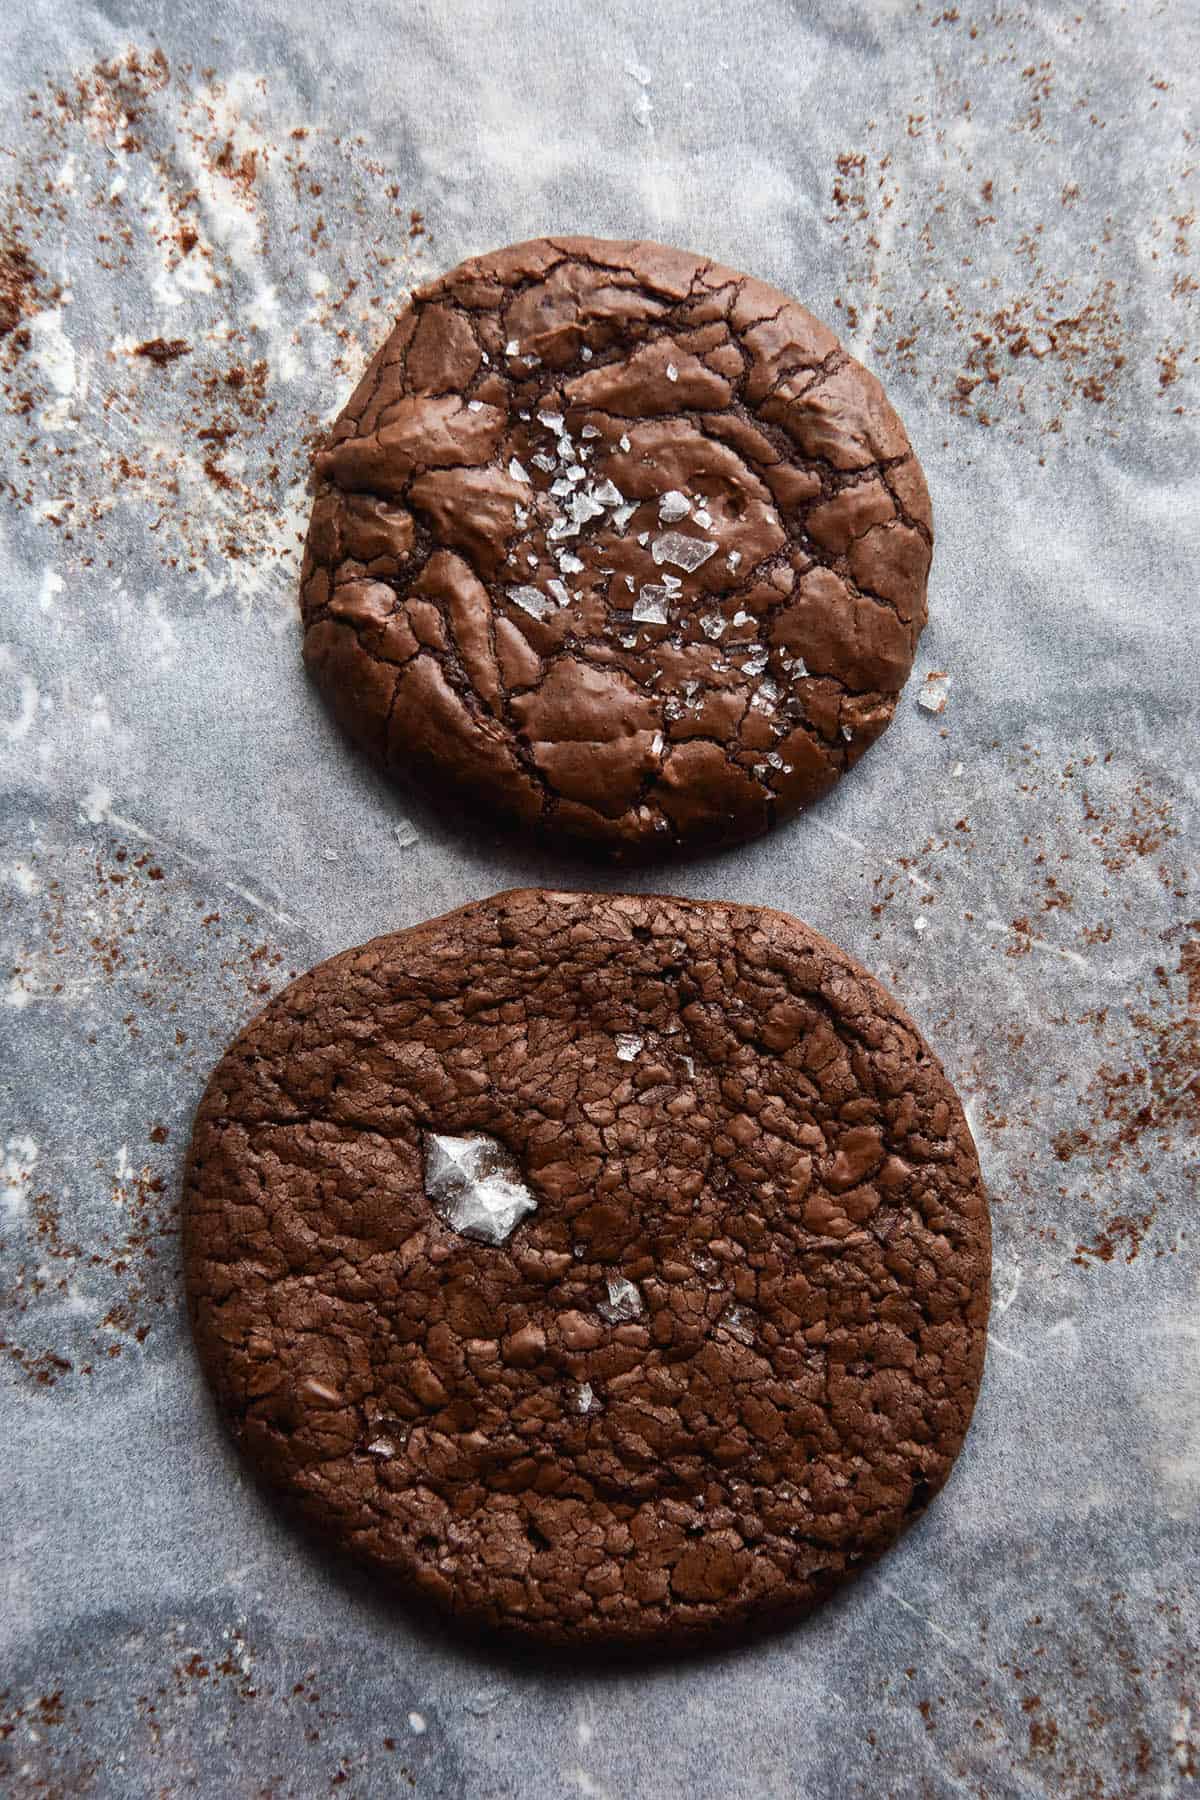 A comparative aerial image of two gluten free brownie cookies atop a baking sheet lined with parchment paper. The top cookie is shinier, cracklier and more pert, whereas the bottom cookie has a matte complexion and has spread significantly.